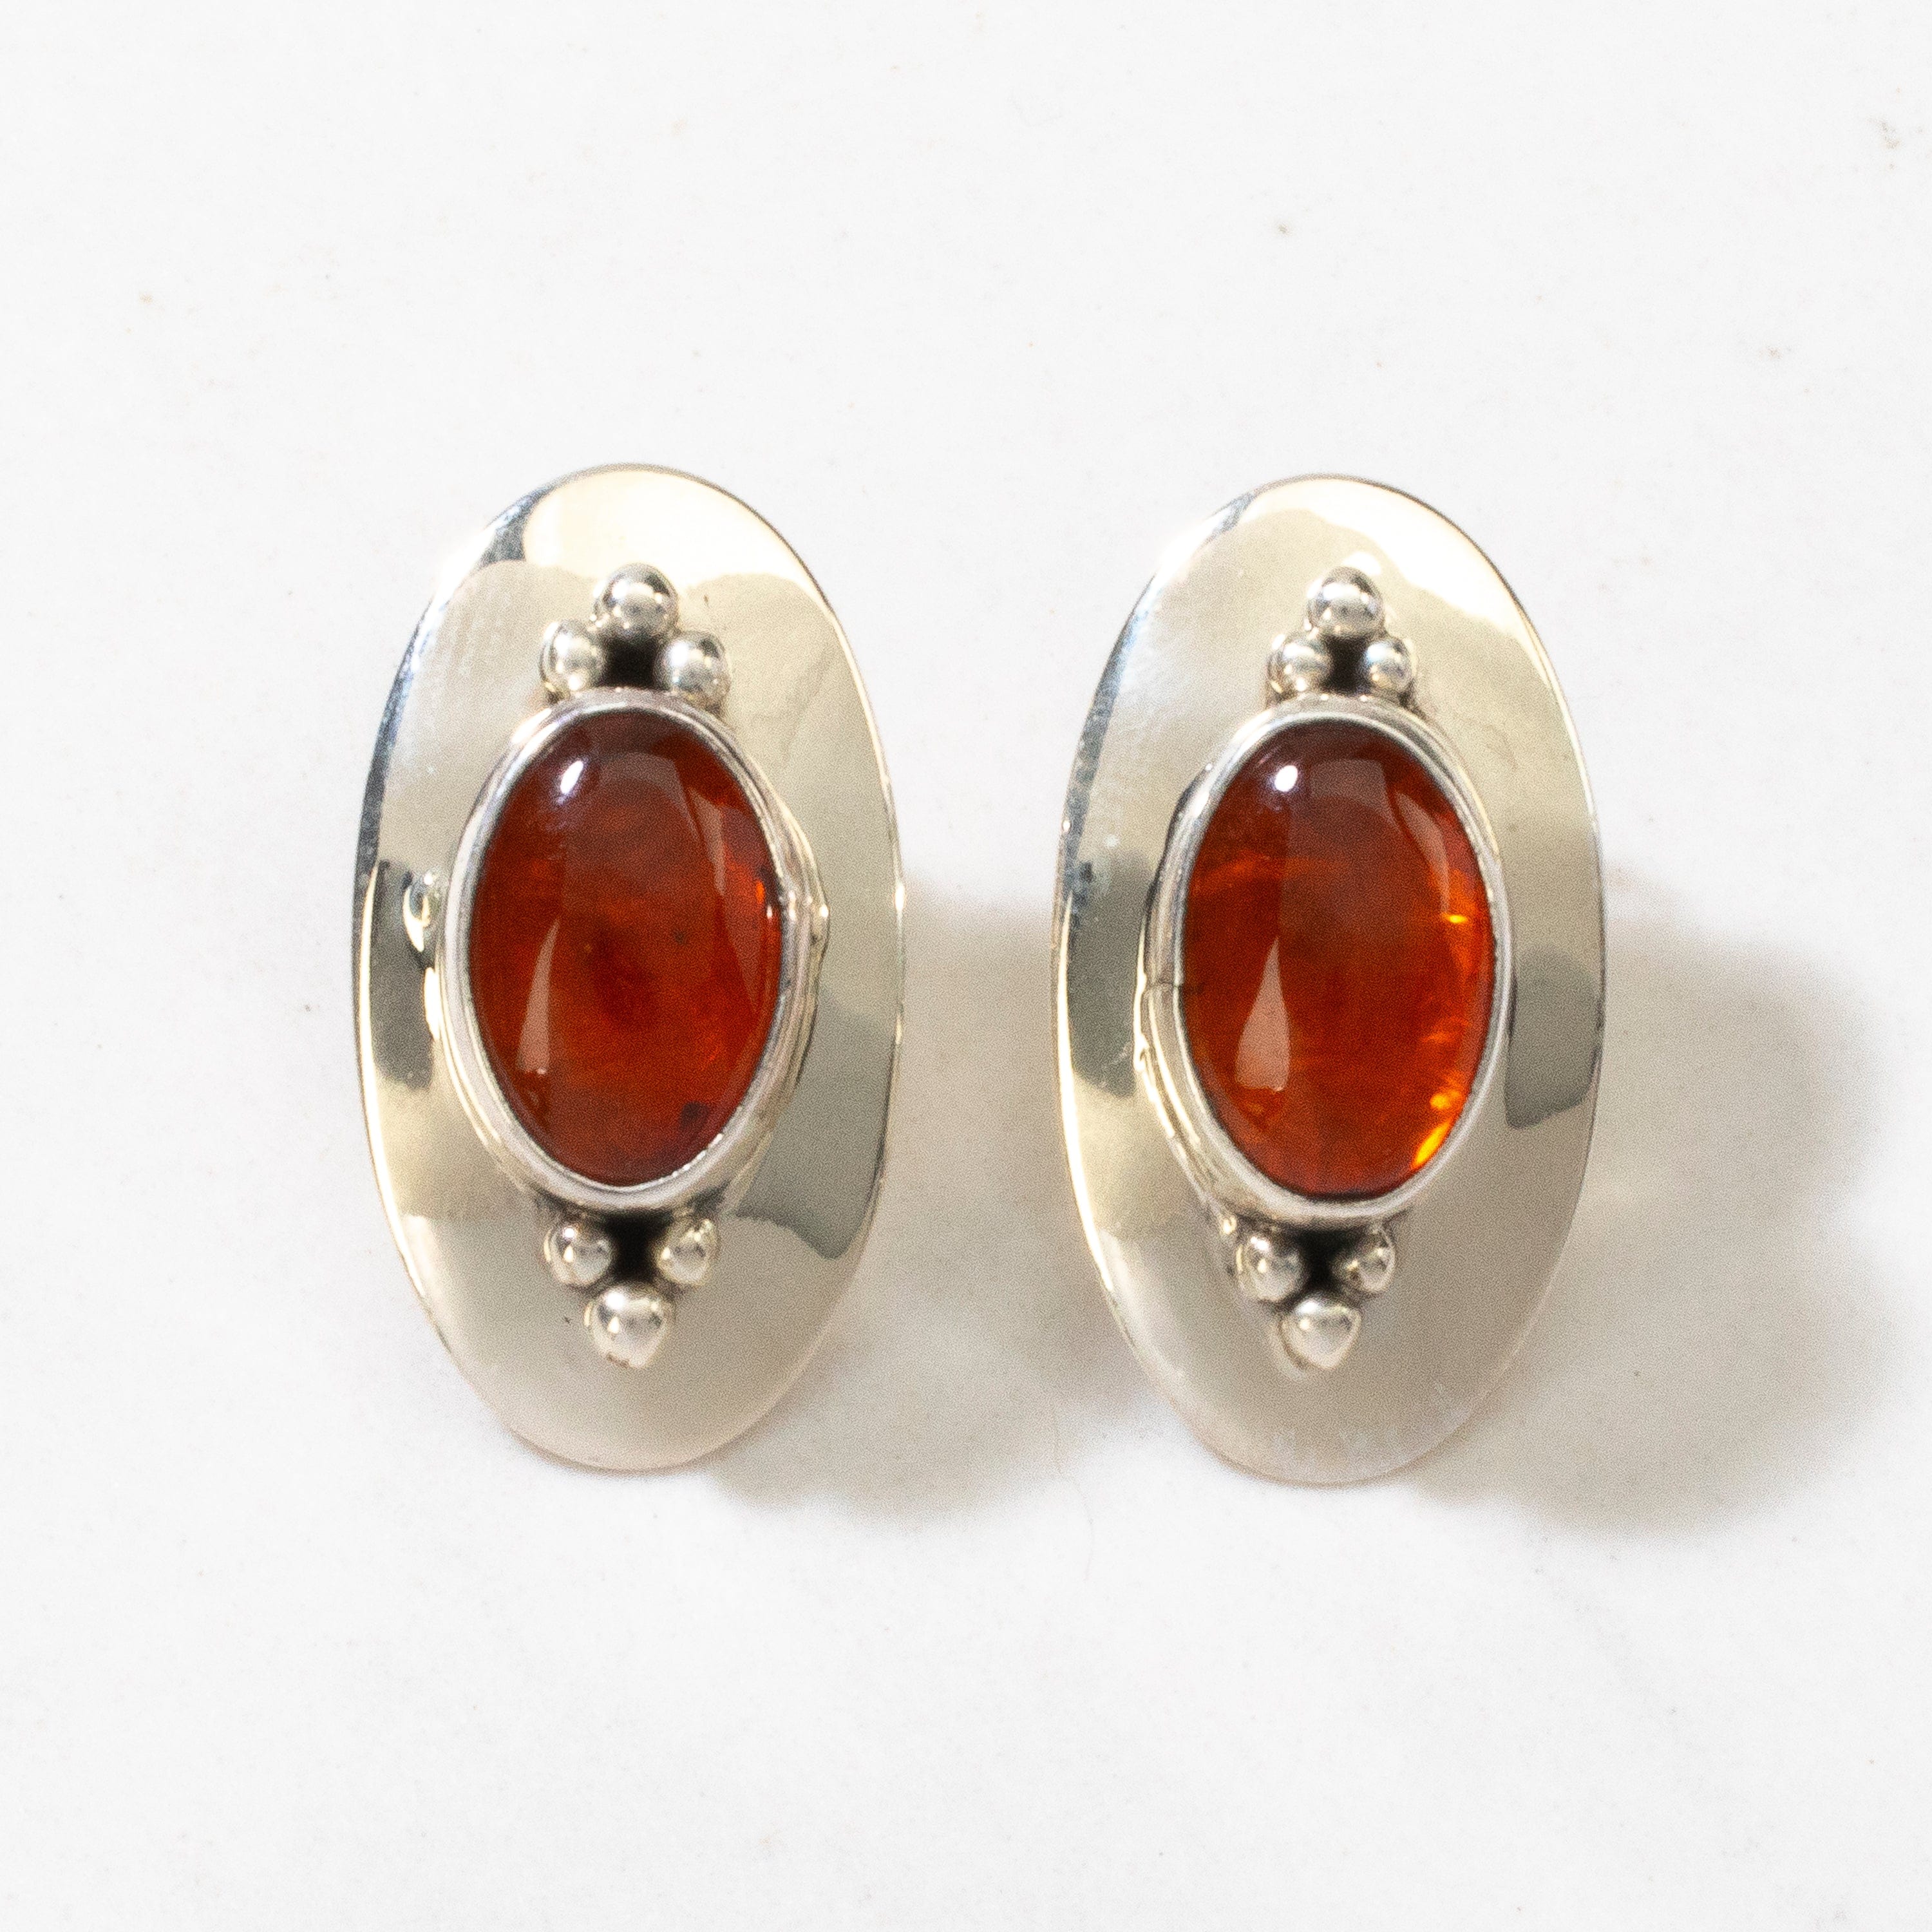 Kalifano Native American Jewelry Baltic Amber Oval Navajo USA Native American Made 925 Sterling Silver Earrings with Stud Backing NAE200.017